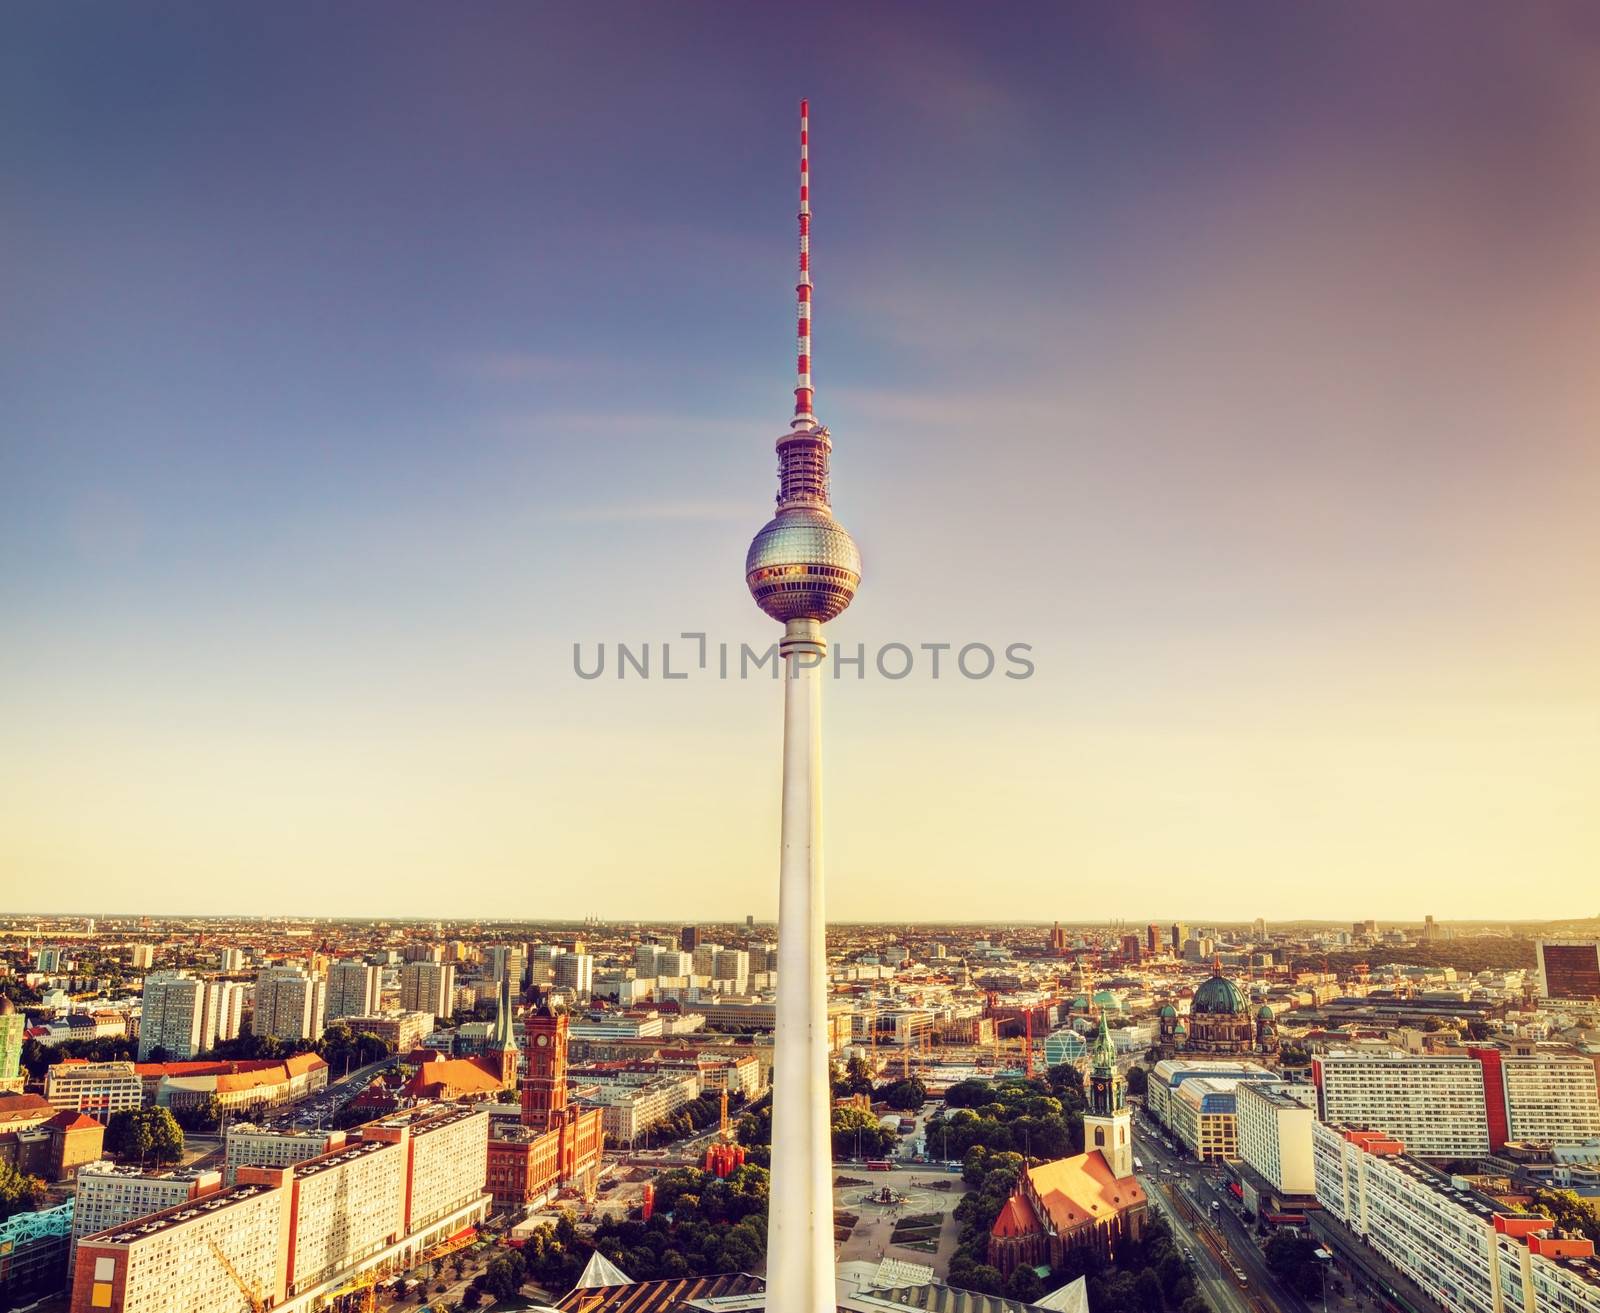 Tv tower or Fersehturm in Berlin, Germany at sunset